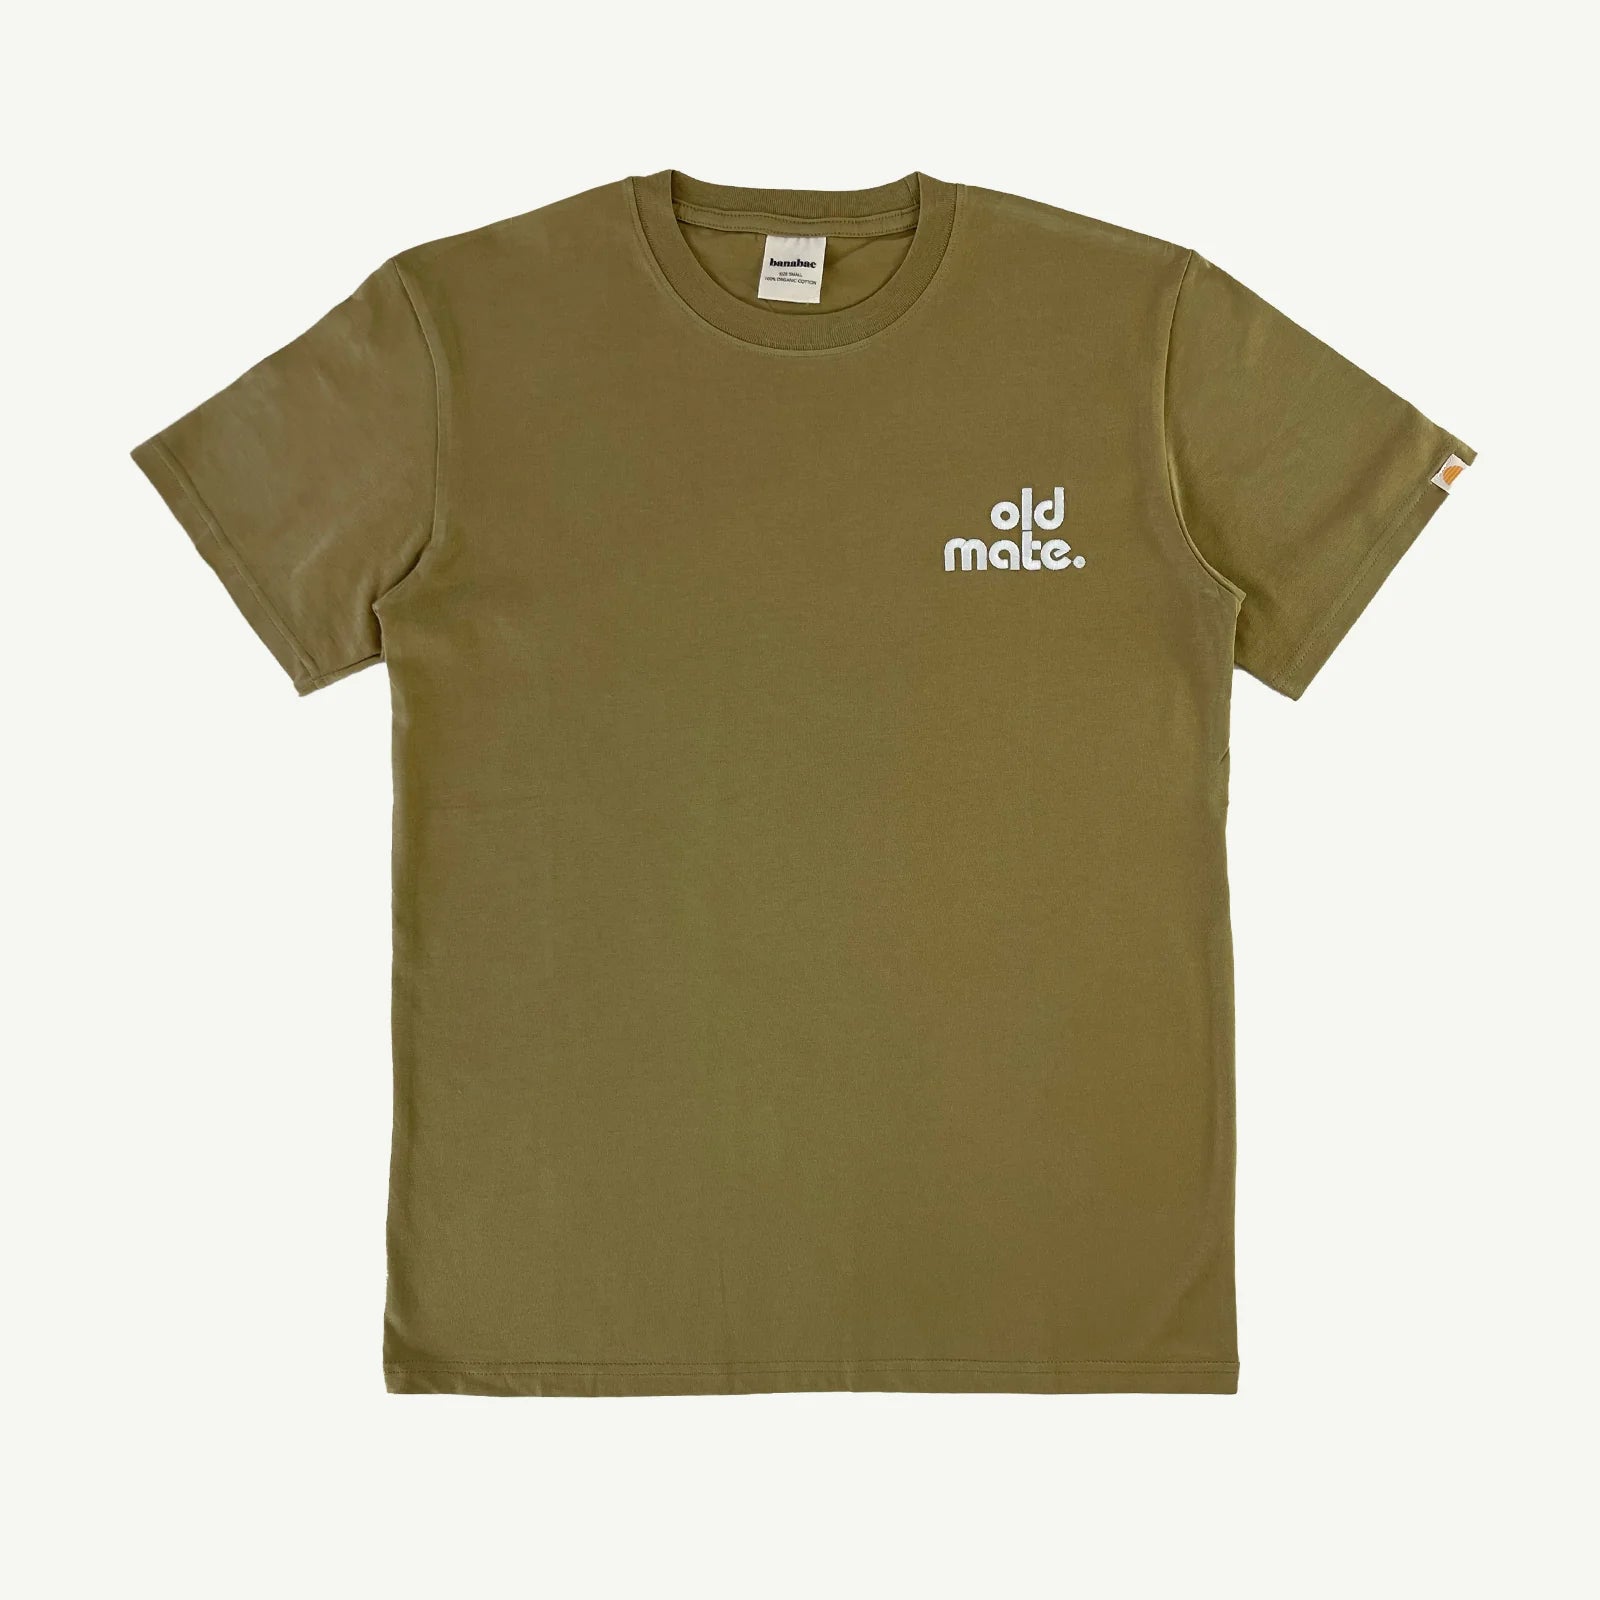 Banabae Old Mate Organic Cotton Adult Tee - Olive